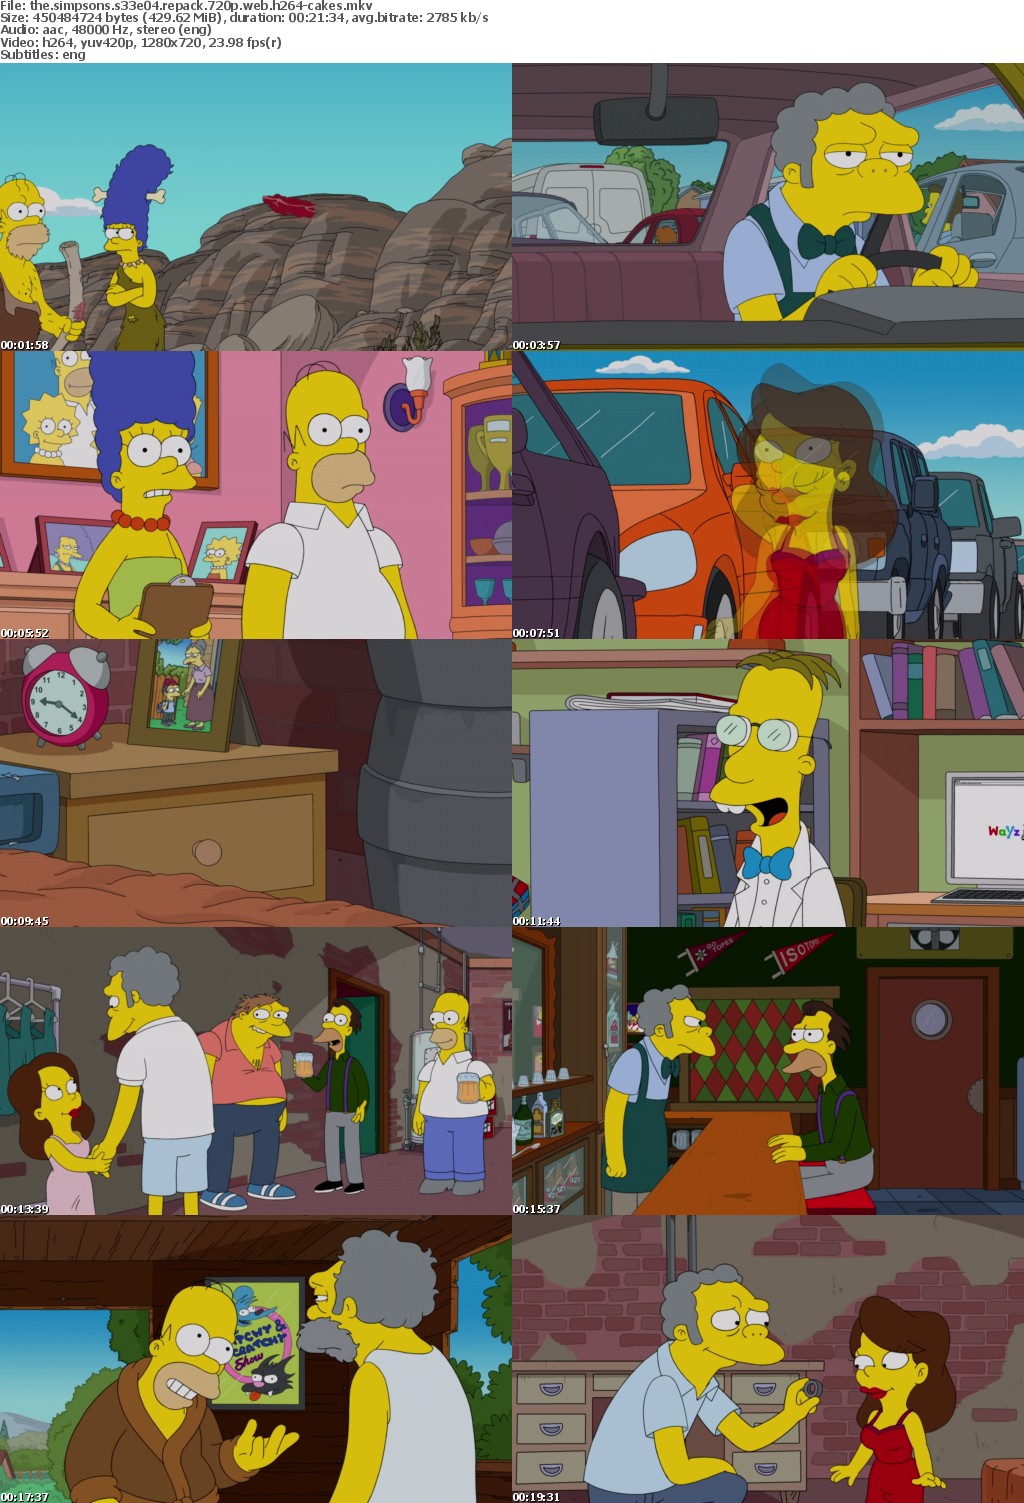 The Simpsons S33E04 REPACK 720p WEB H264-CAKES